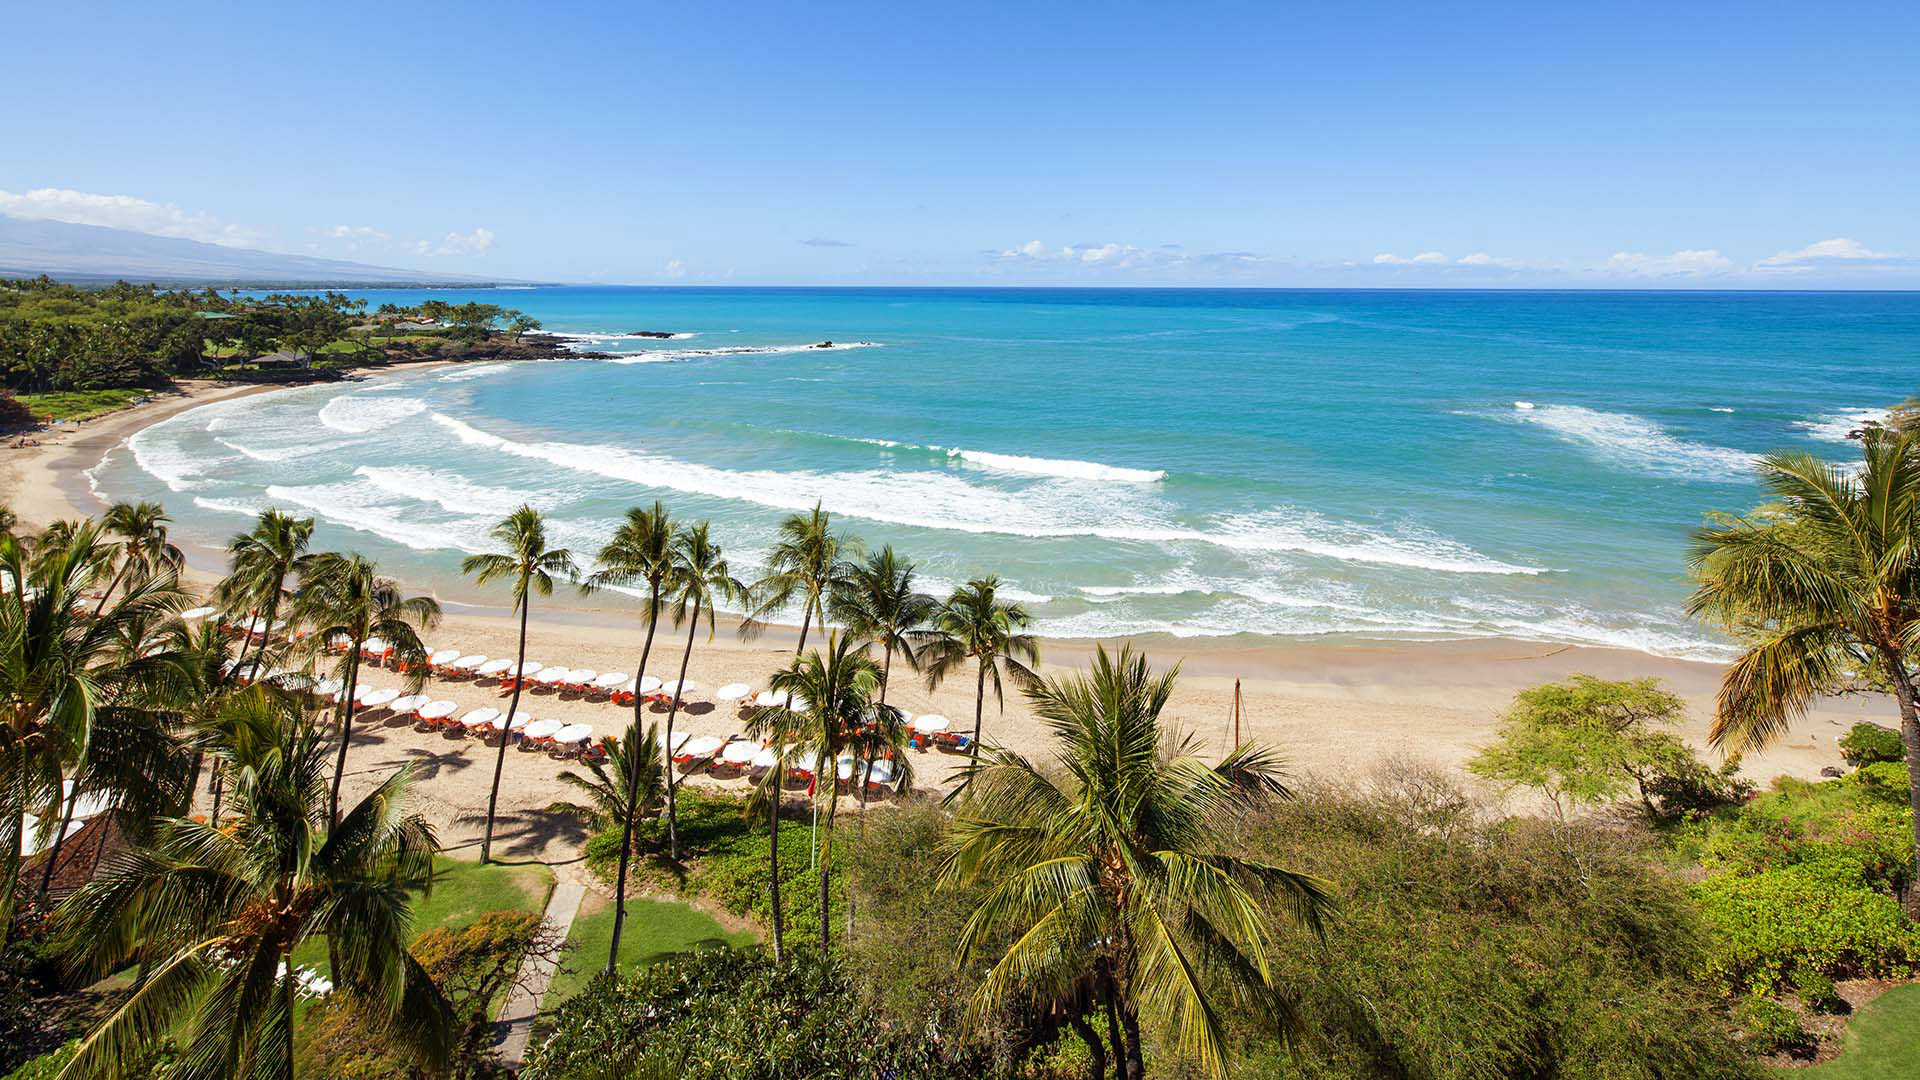 Palm trees, beach umbrellas and waves on the beach at the Mauna Kea Beach Hotel, Autograph Collection